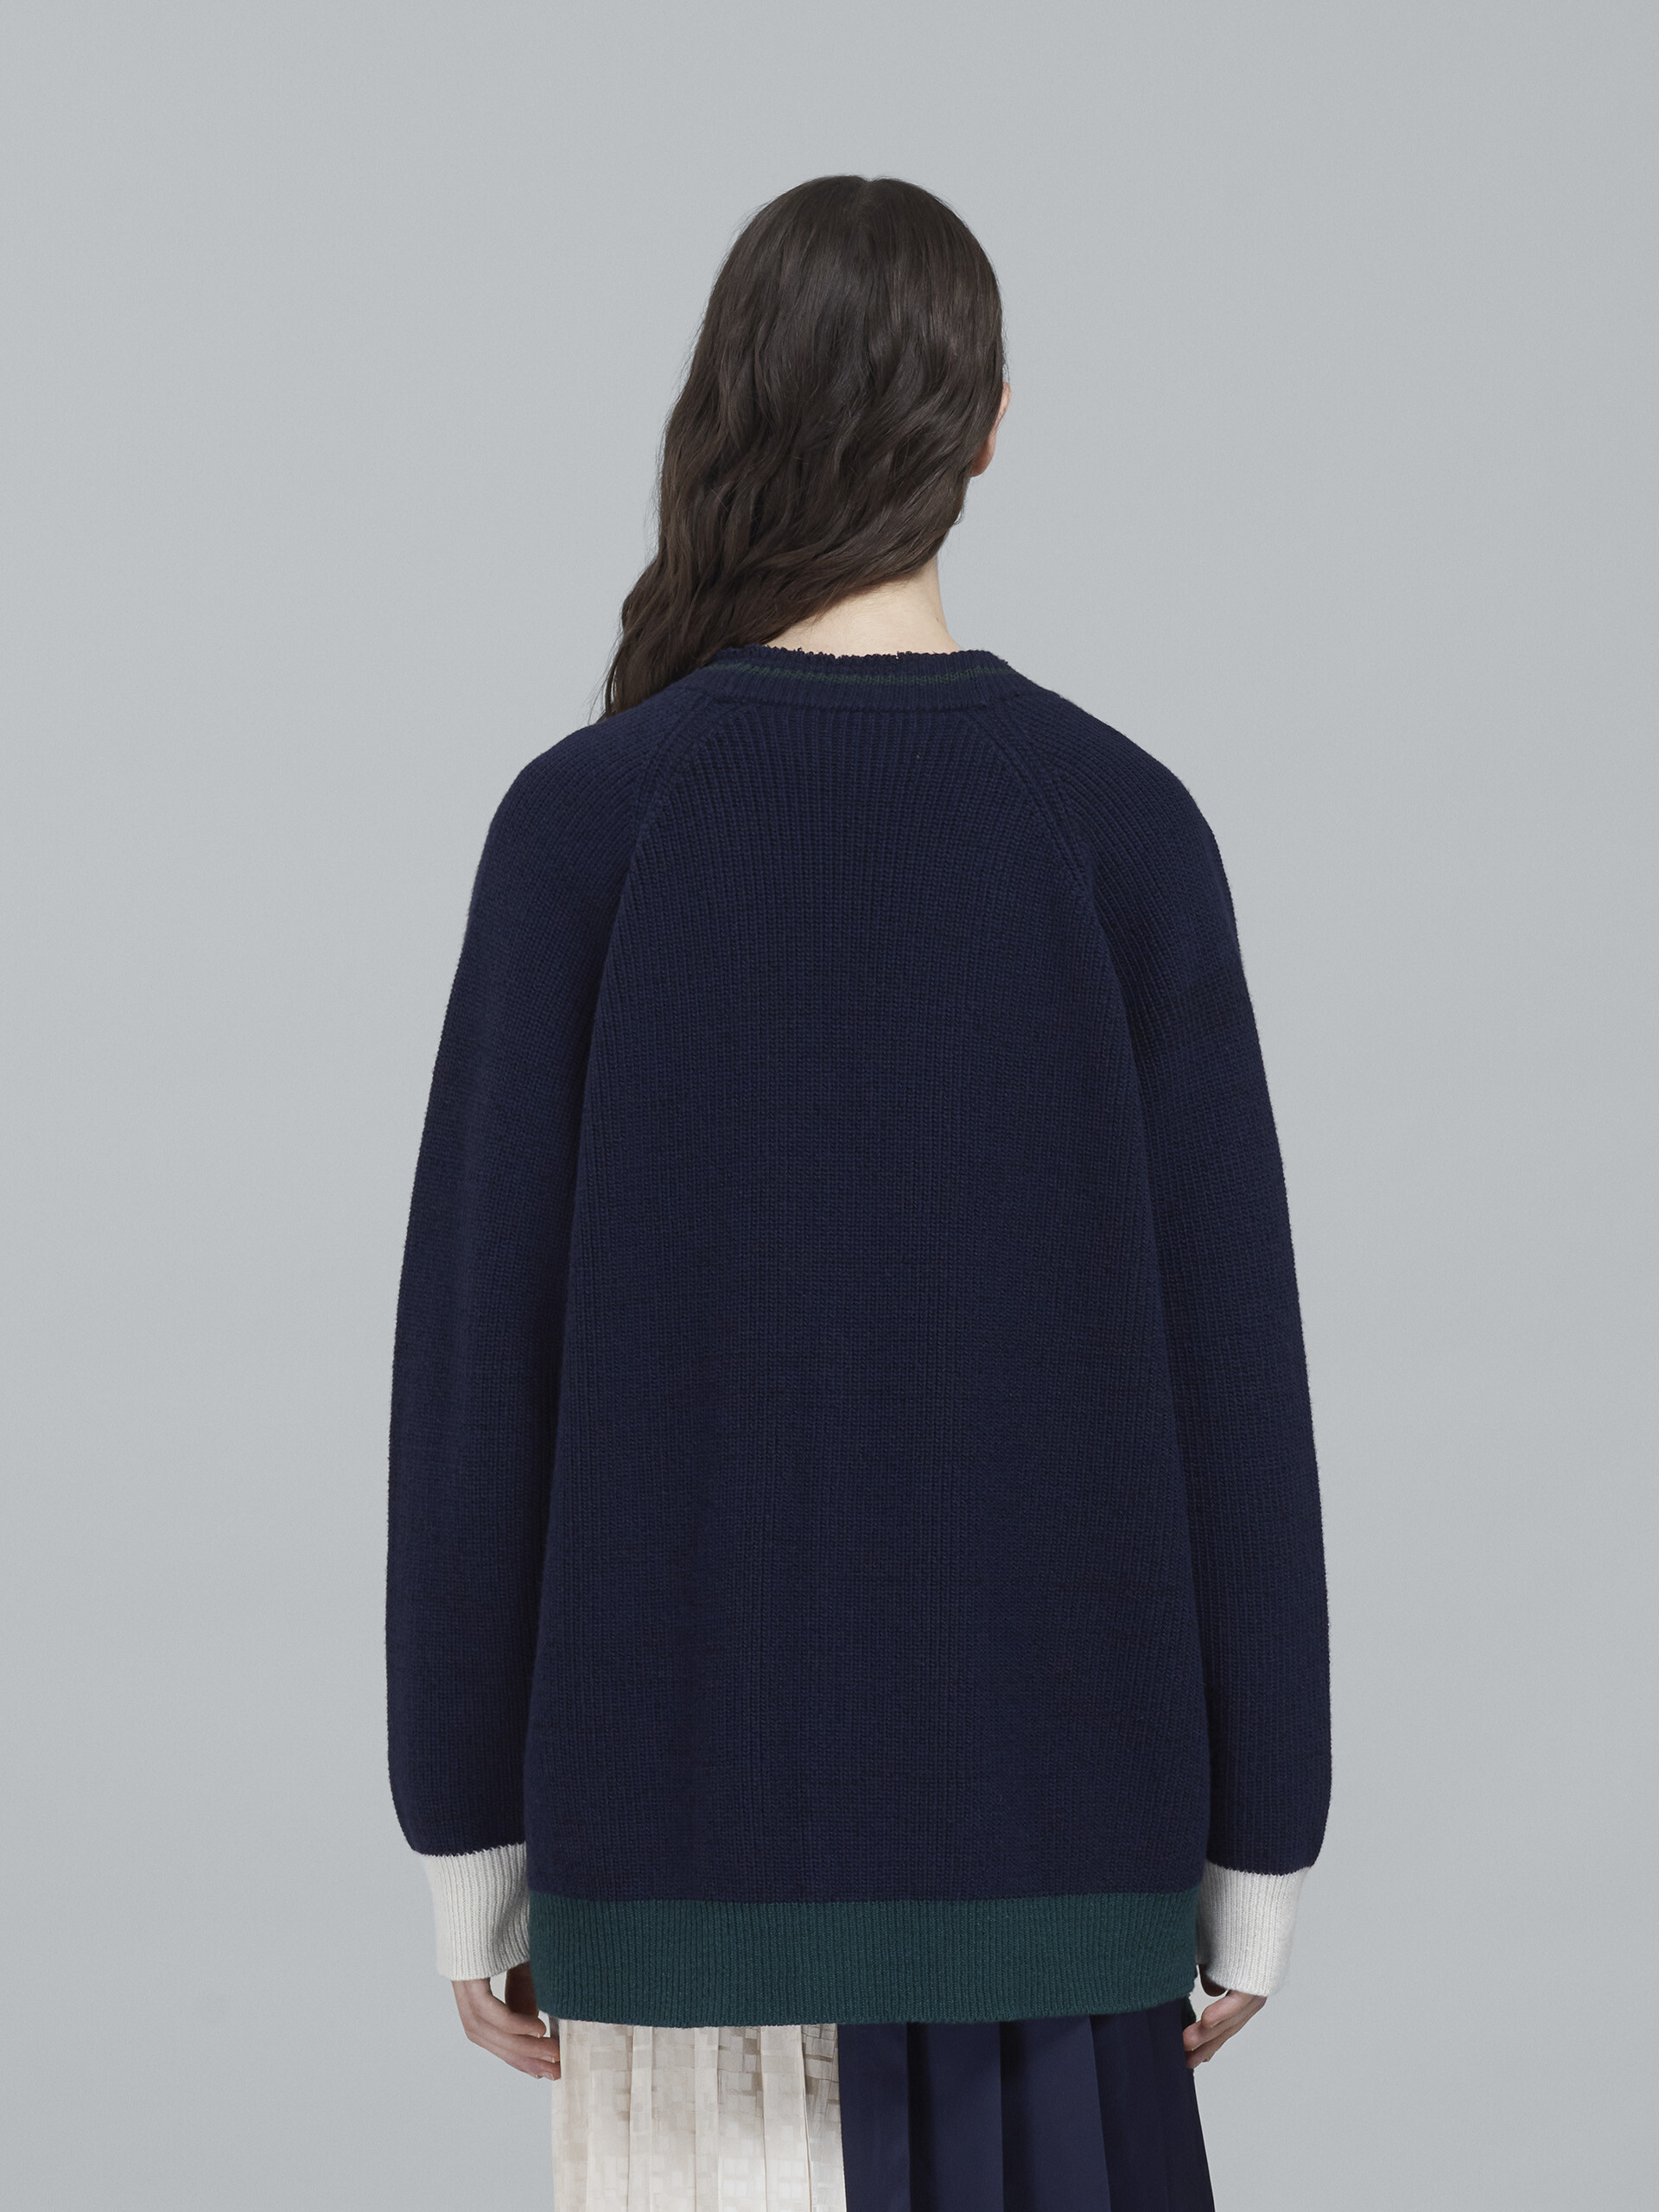 Blue Shetland wool and cotton long cardigan - Pullovers - Image 3